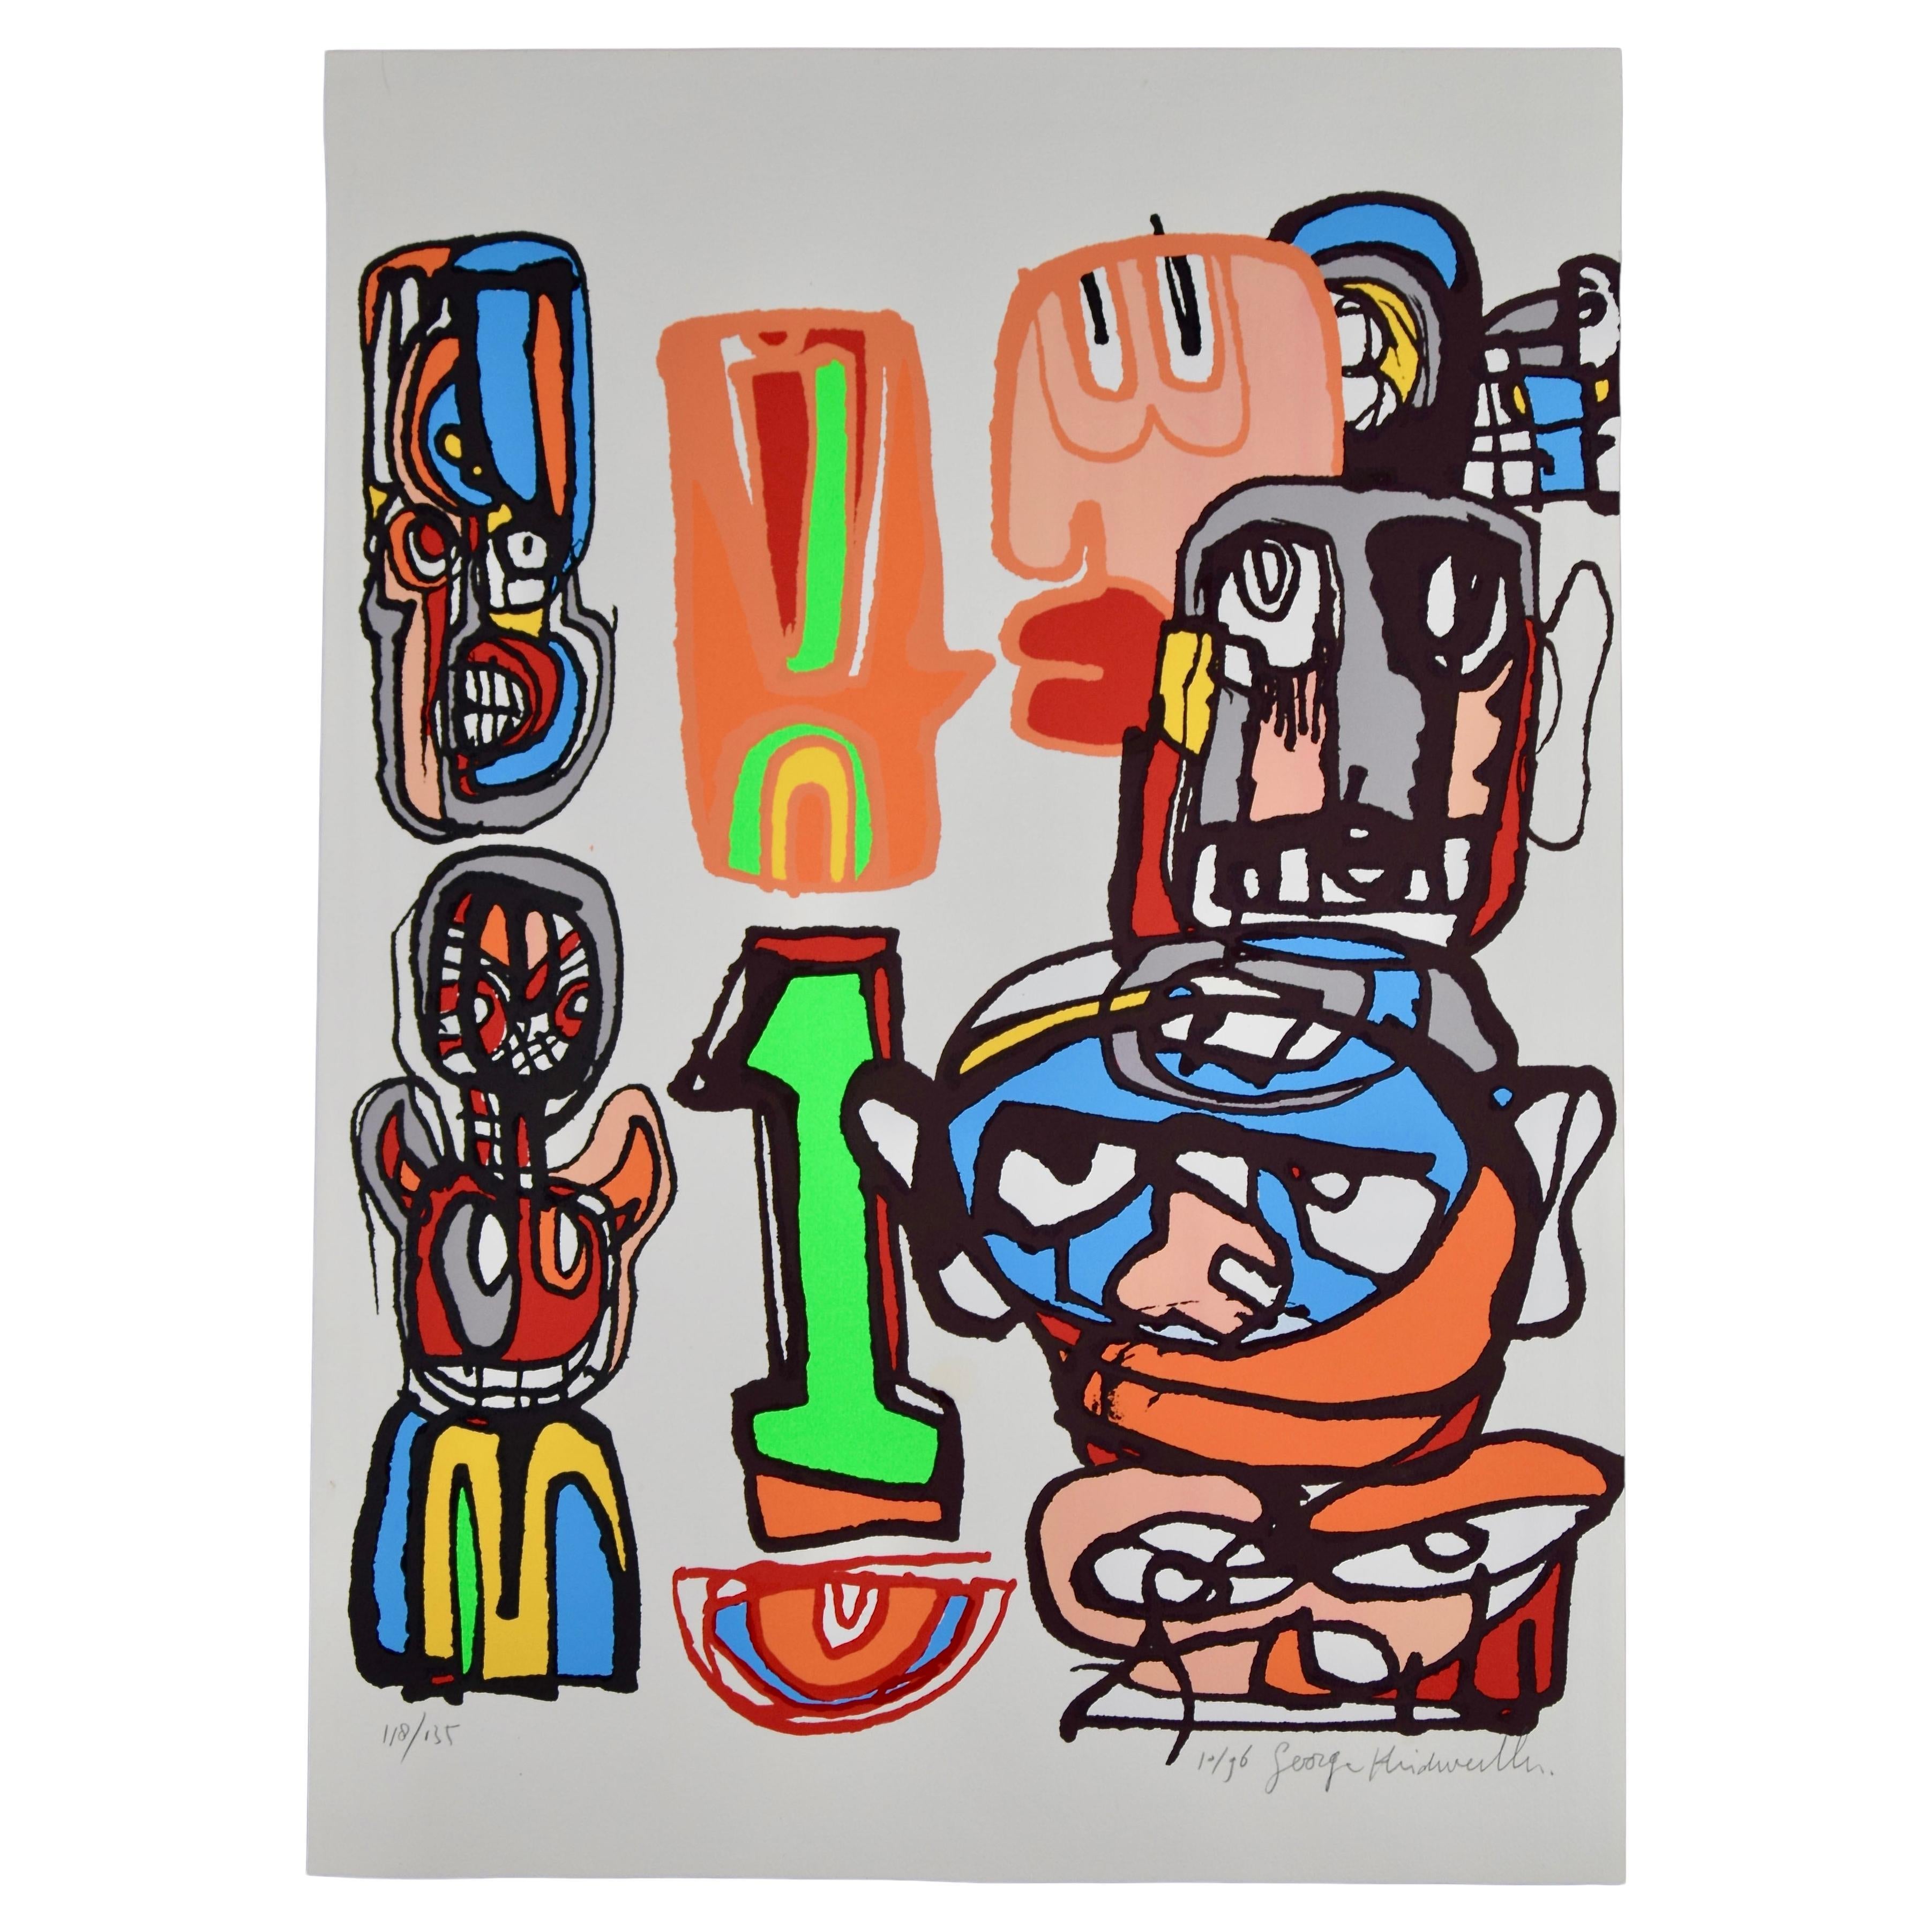 Untitled Limited Edition Modern Pop Art Screen Print by George Heidweiller For Sale